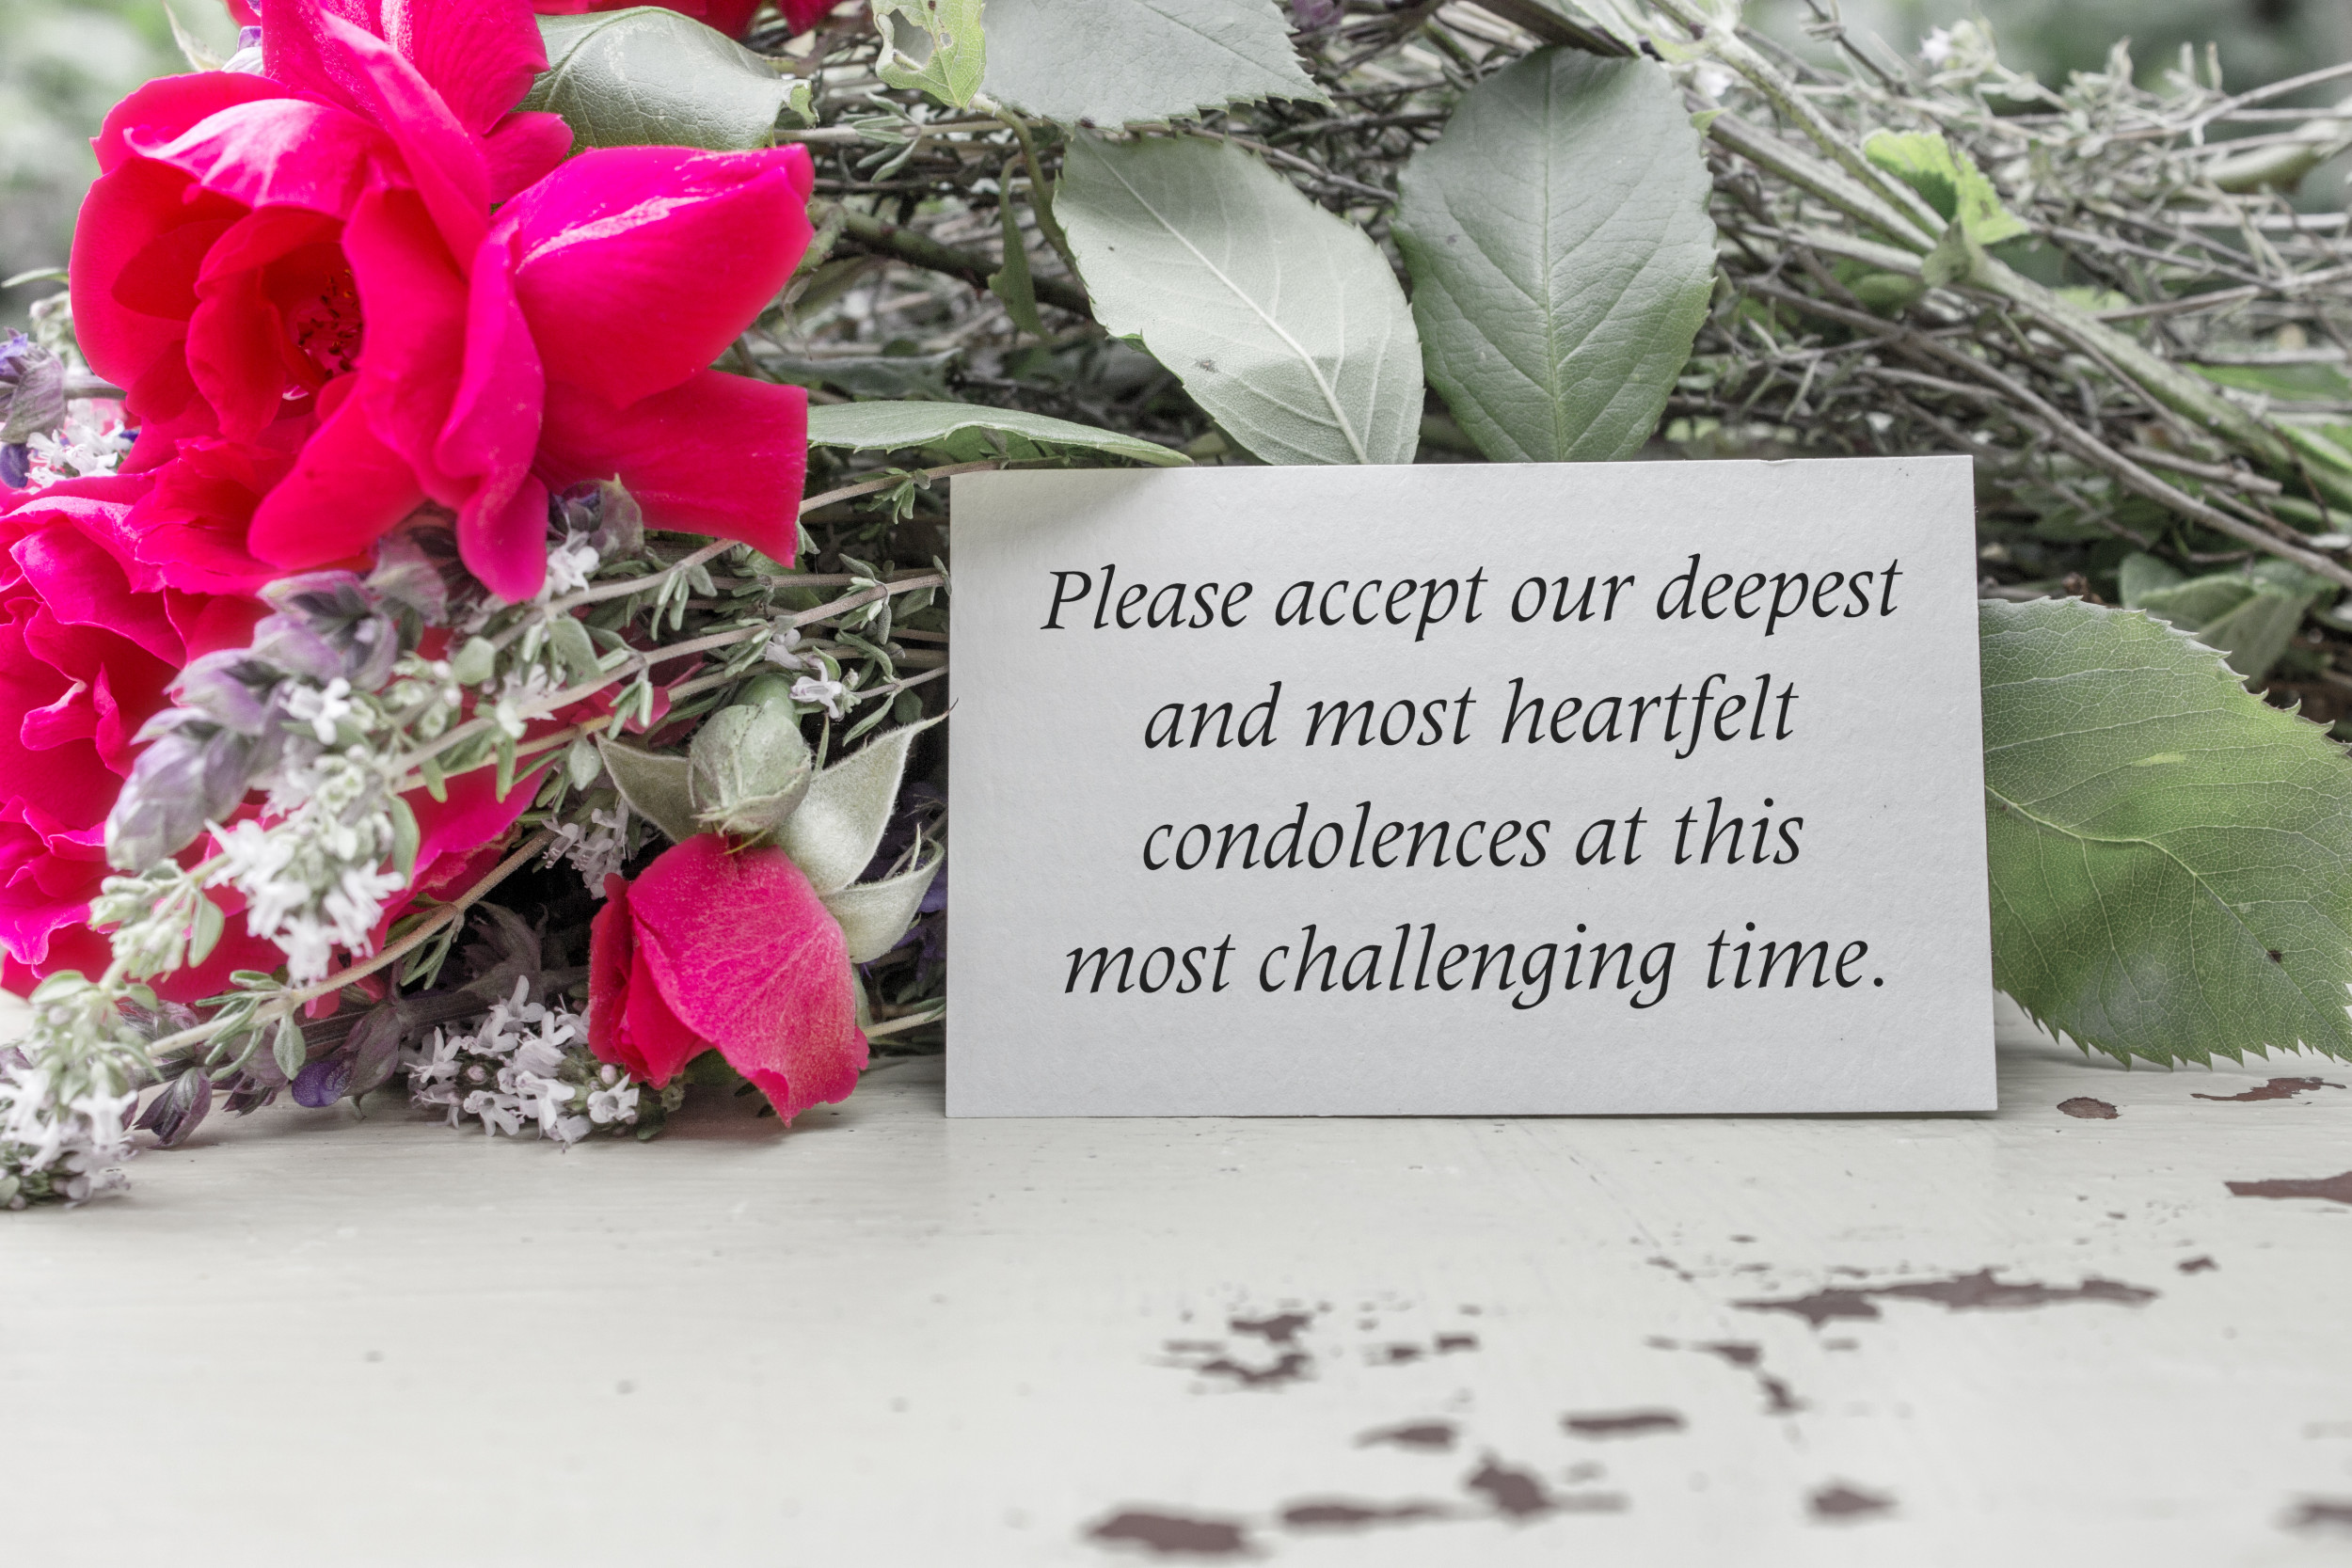 so-very-sorry-for-your-loss-twitter-goes-wild-for-resignations-using-condolence-cards